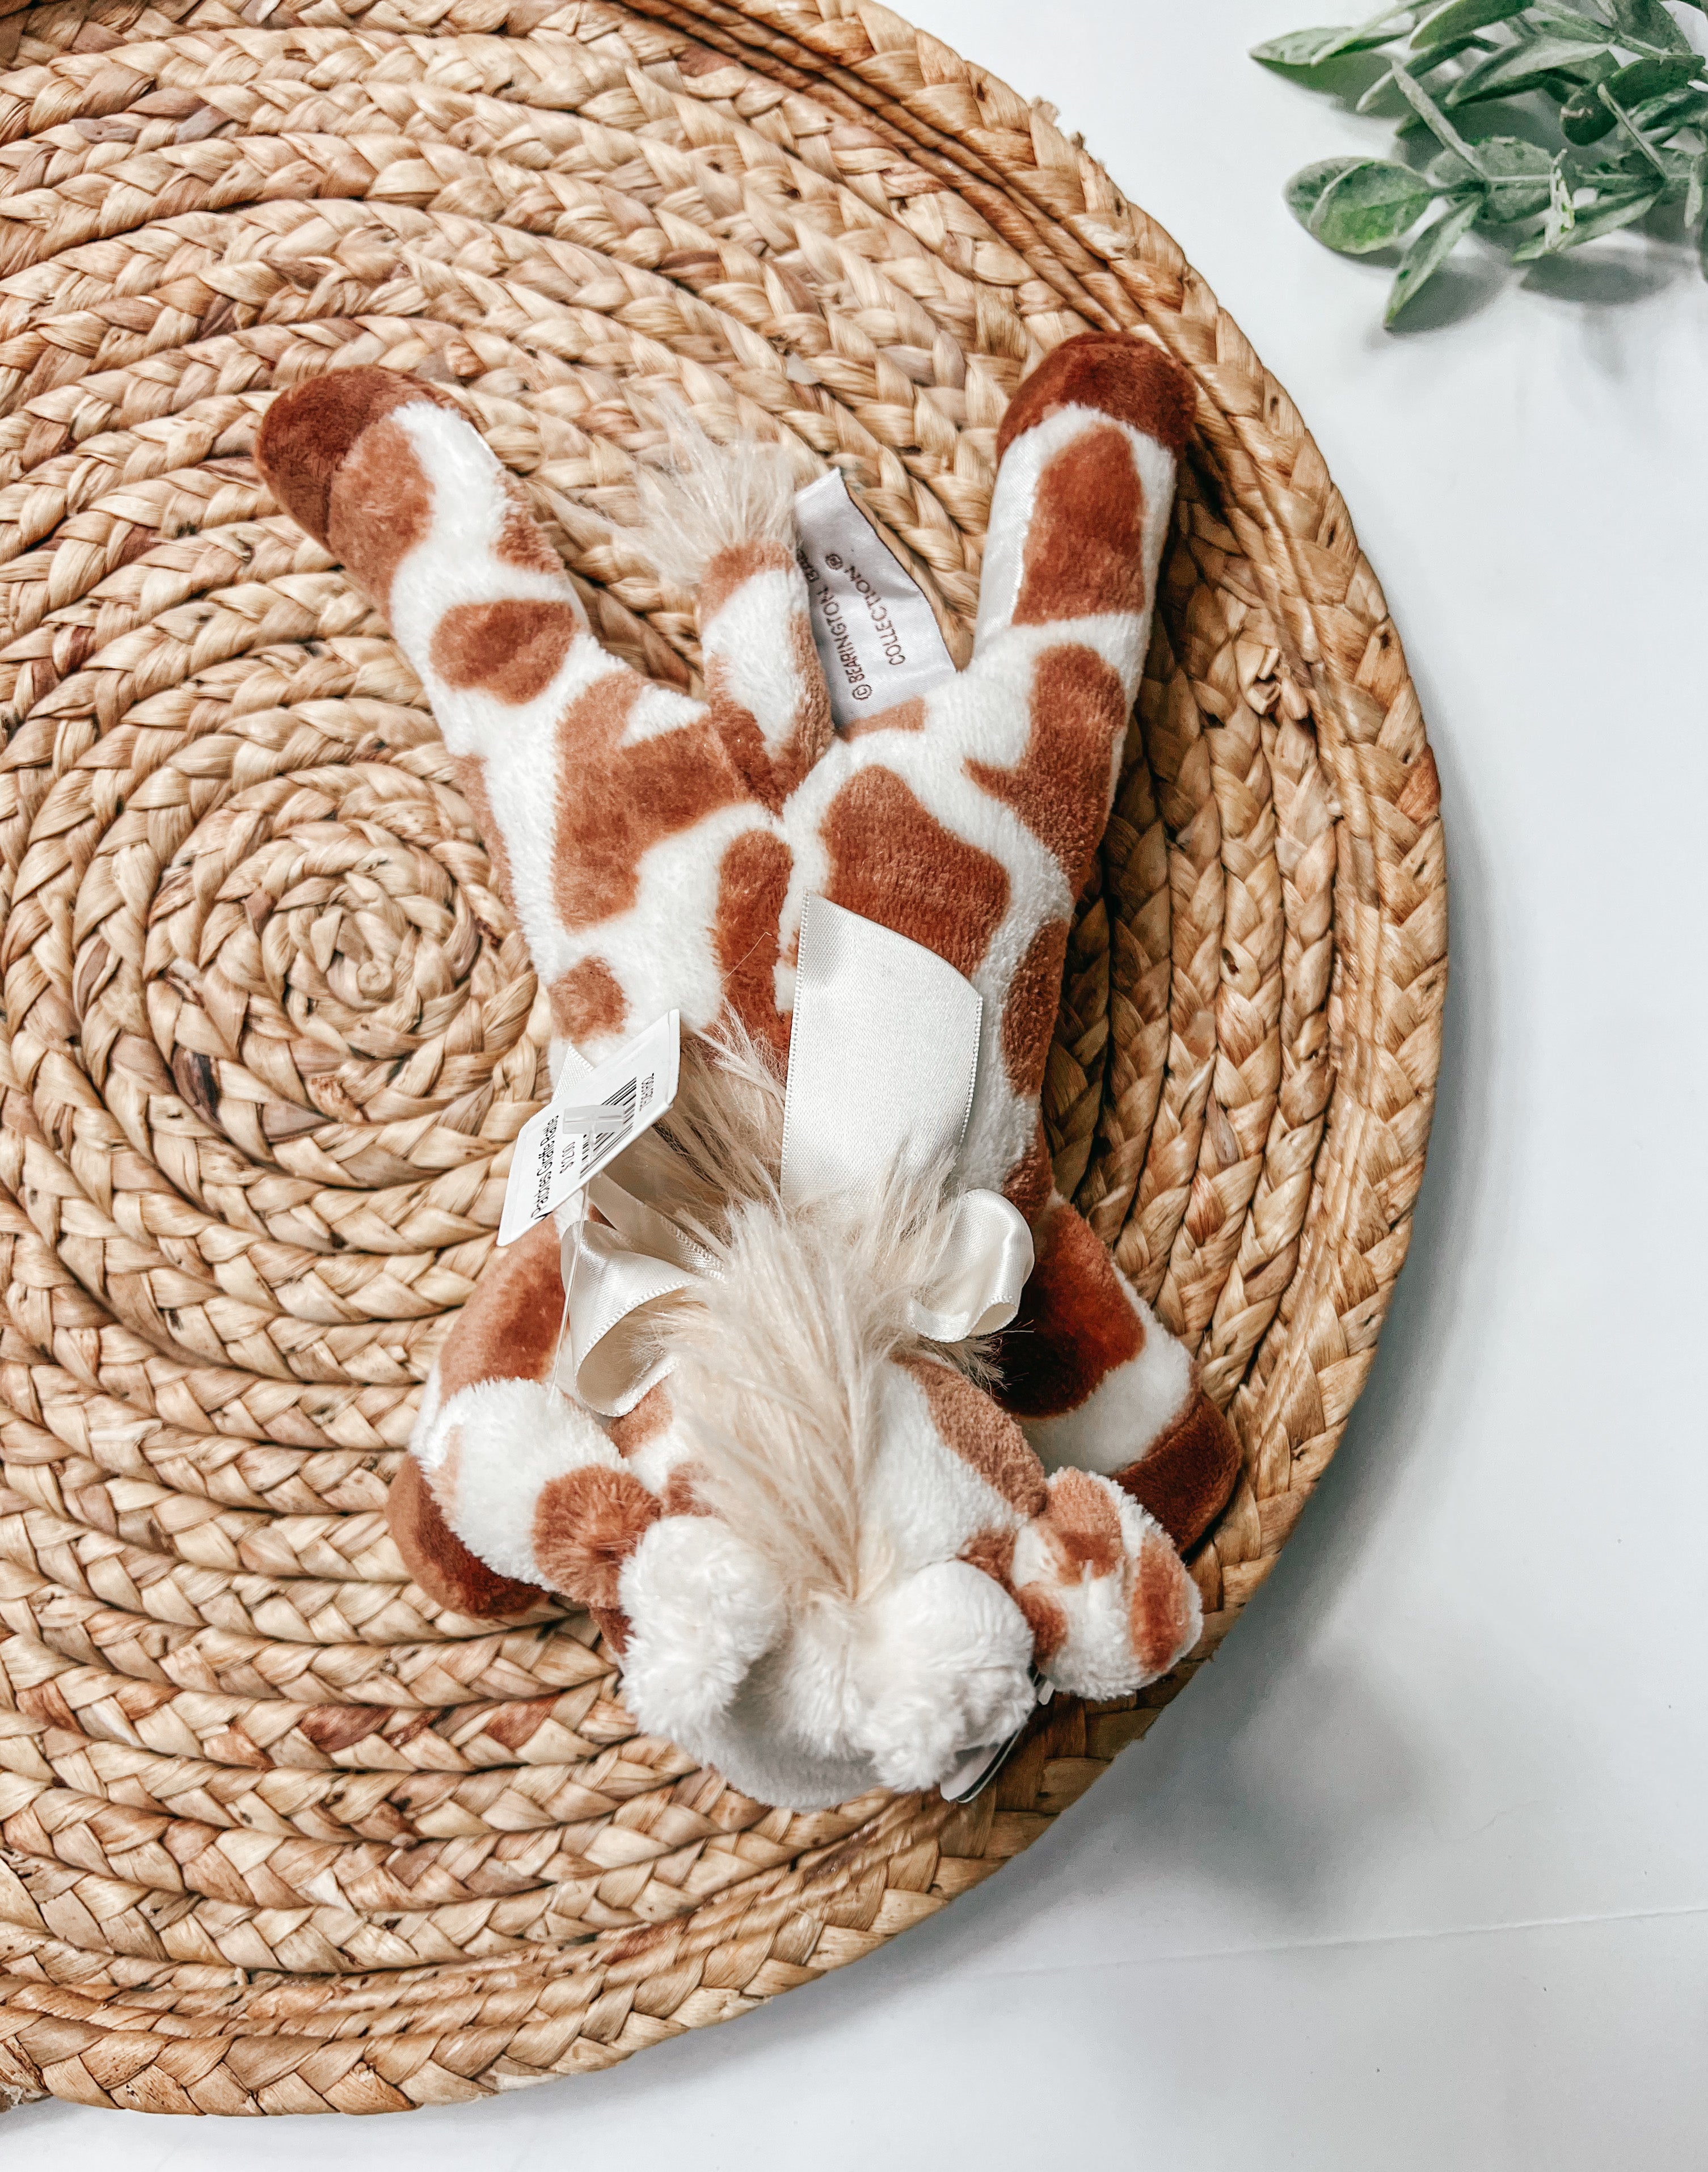 Baby Patches Giraffe Rattle